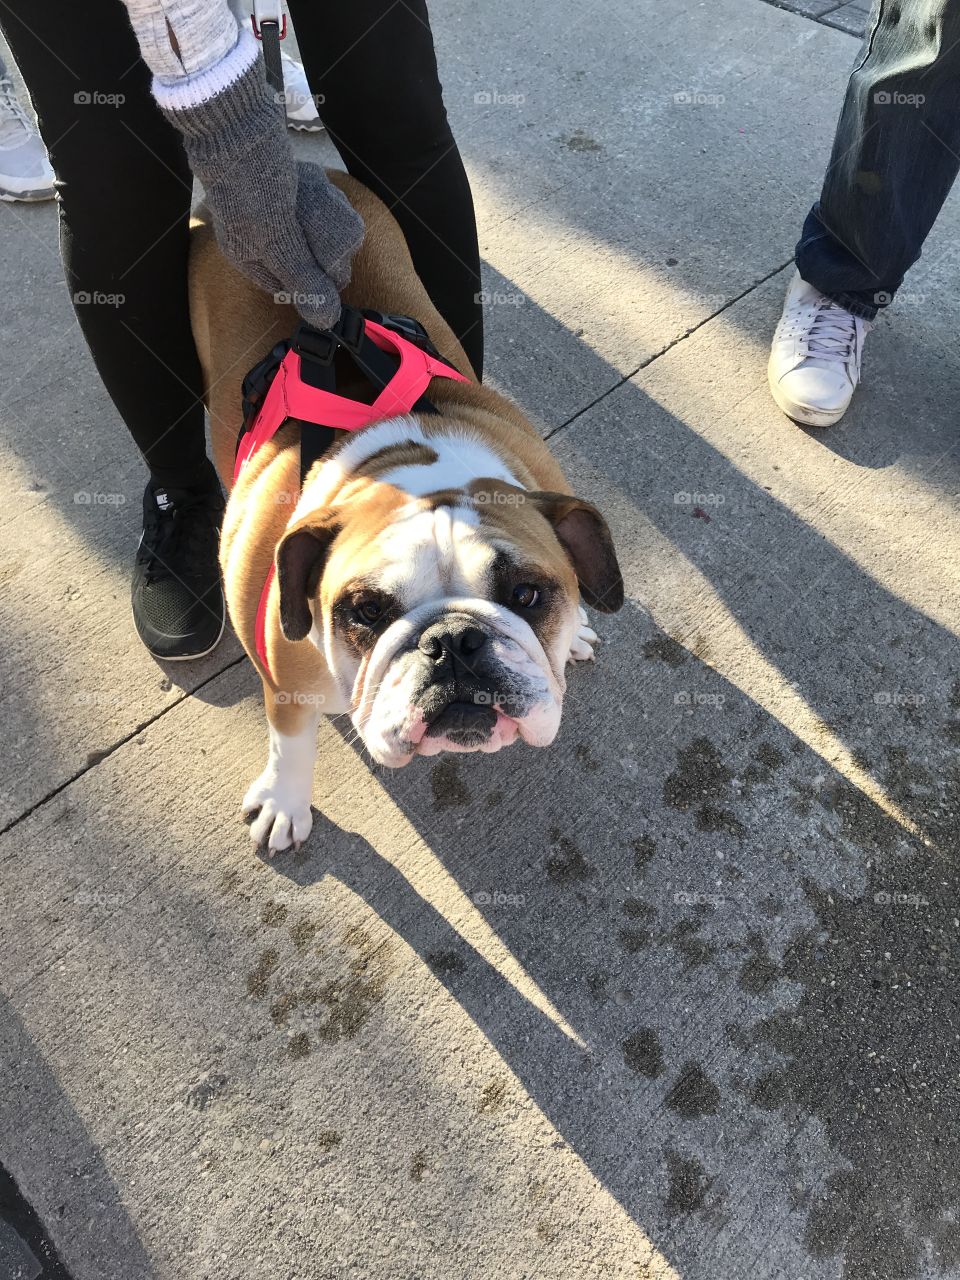 Dog at run for the cure 